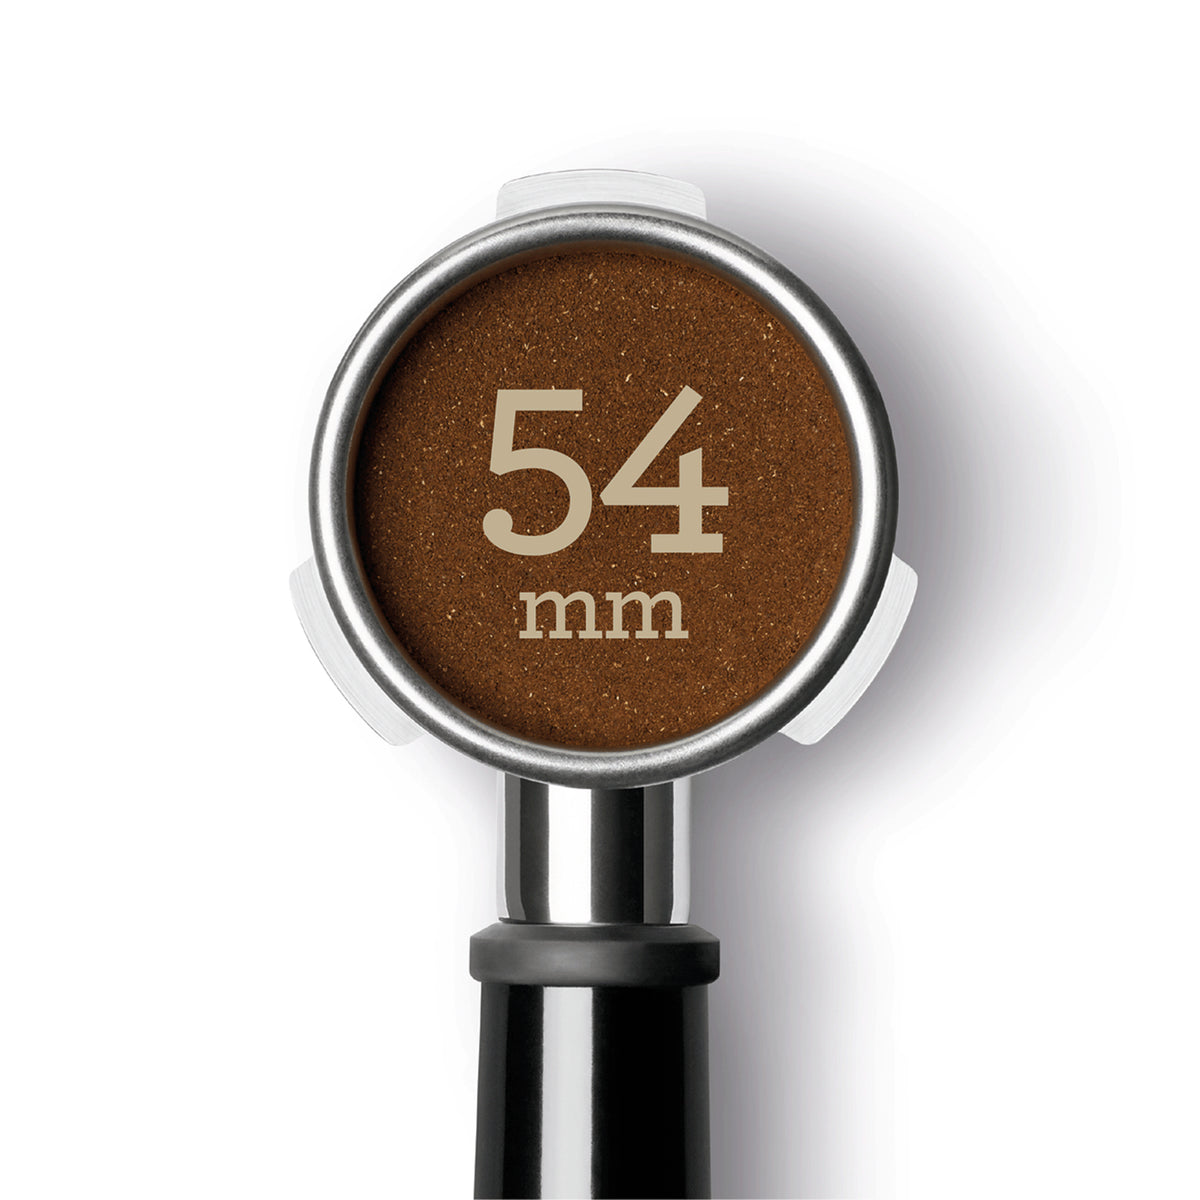 Breville Dosing Funnel BEA201 produces a perfect tamp on 54 mm portafilter